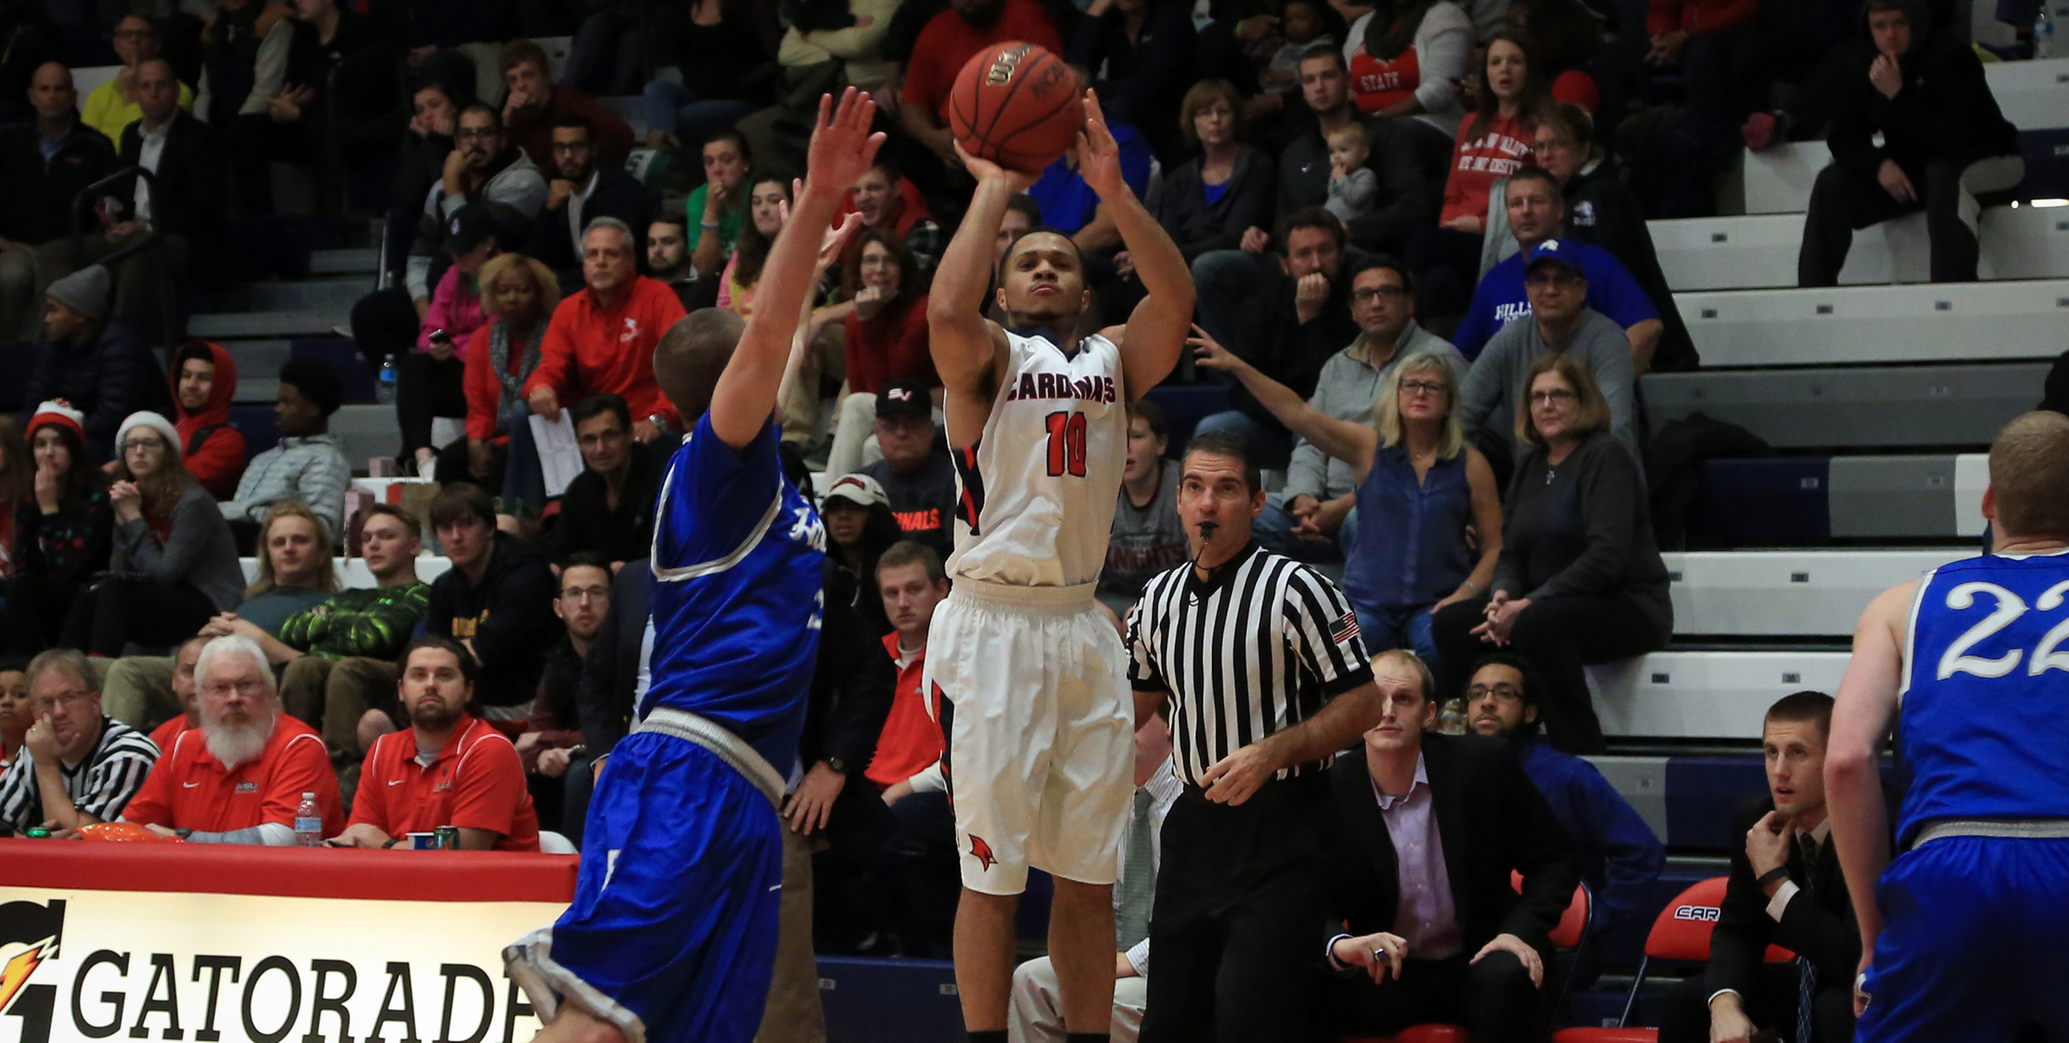 Cardinals Defeat Chargers 74-70 in GLIAC Opener